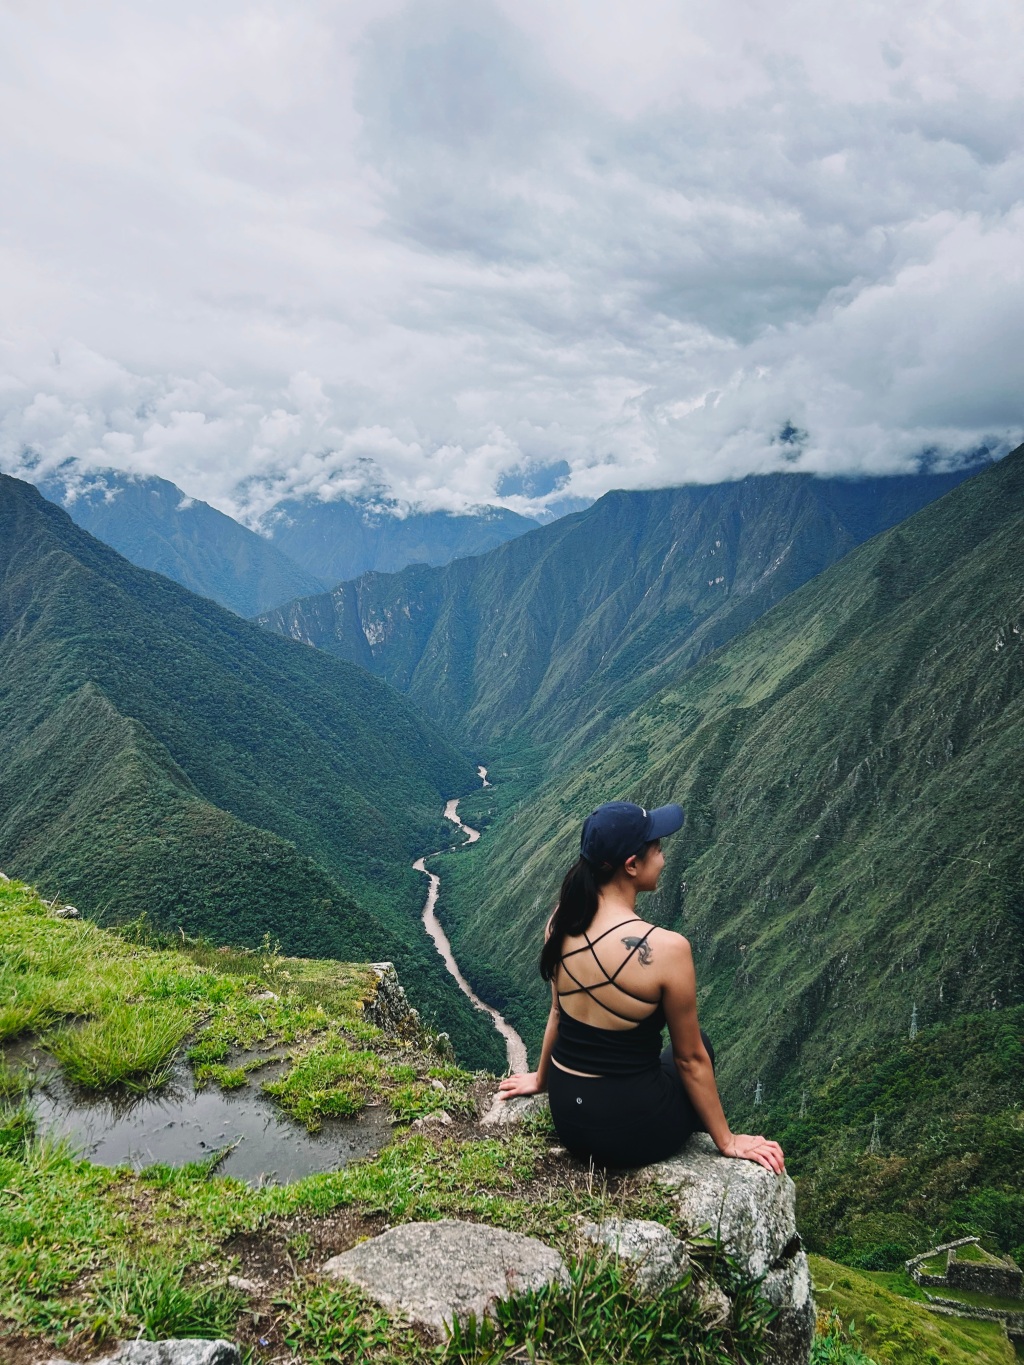 5 LIFE LESSONS from my SOLO TRIP IN PERU